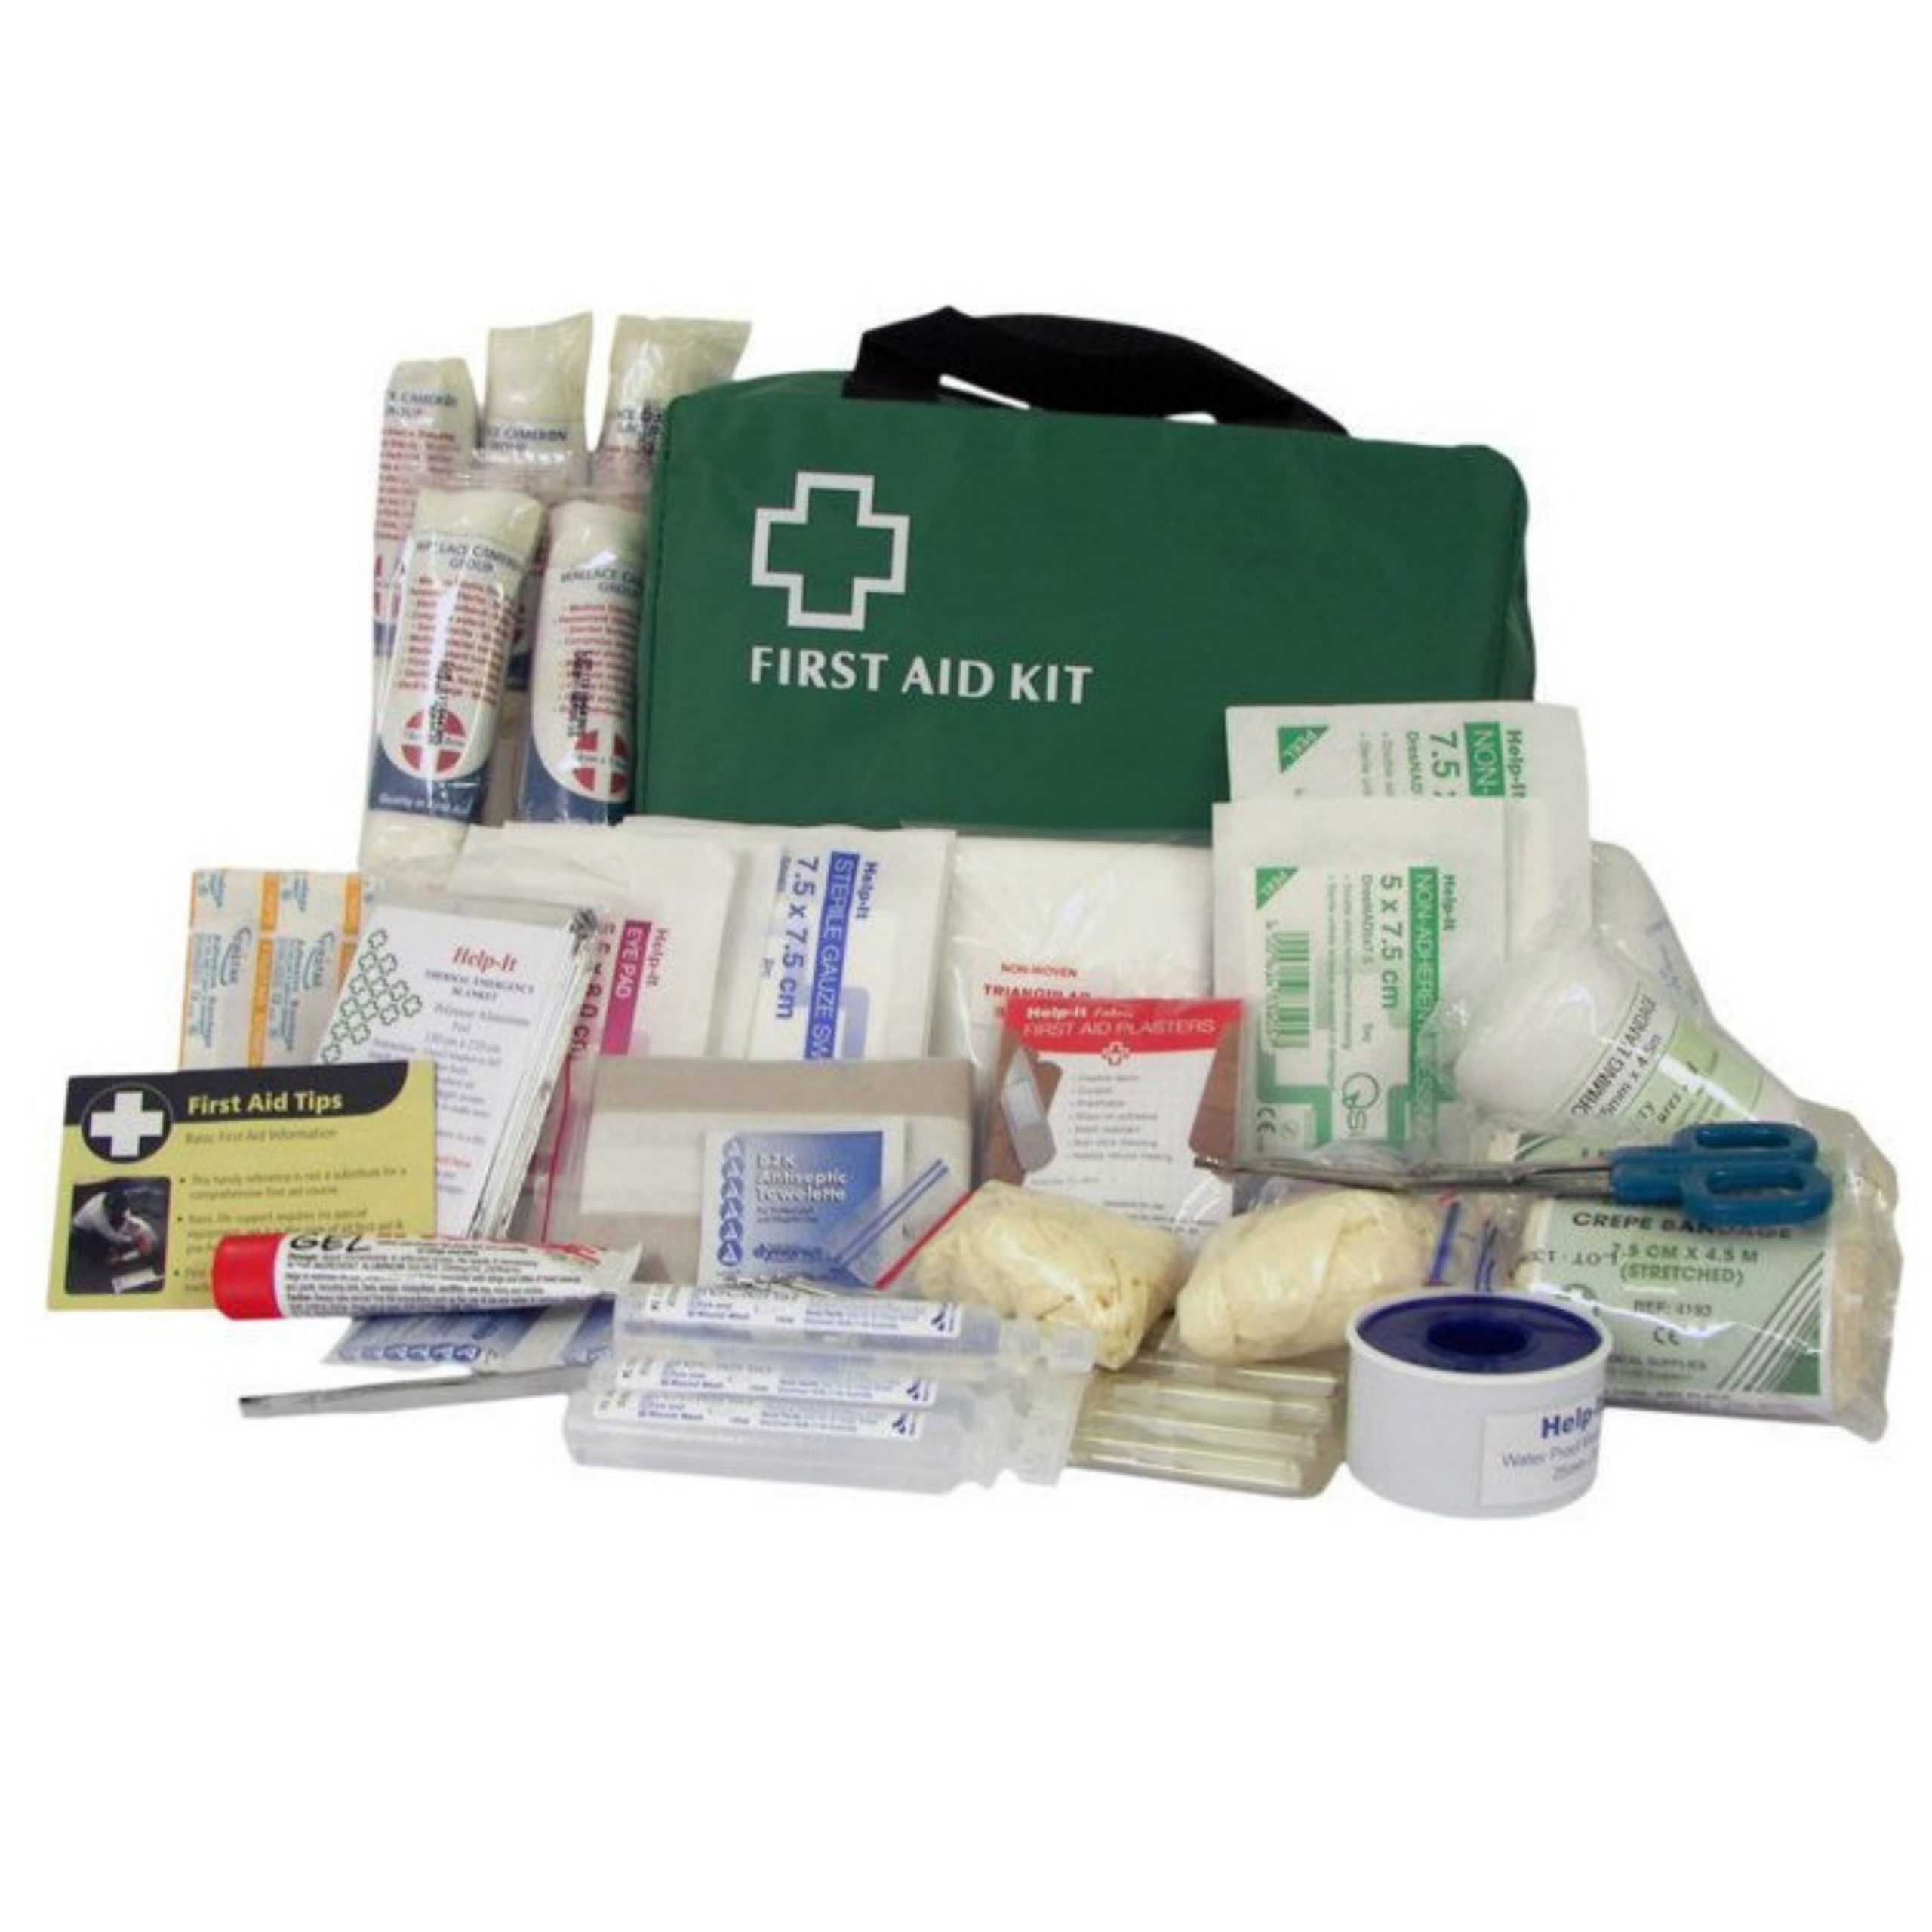 comprehensive first aid kit